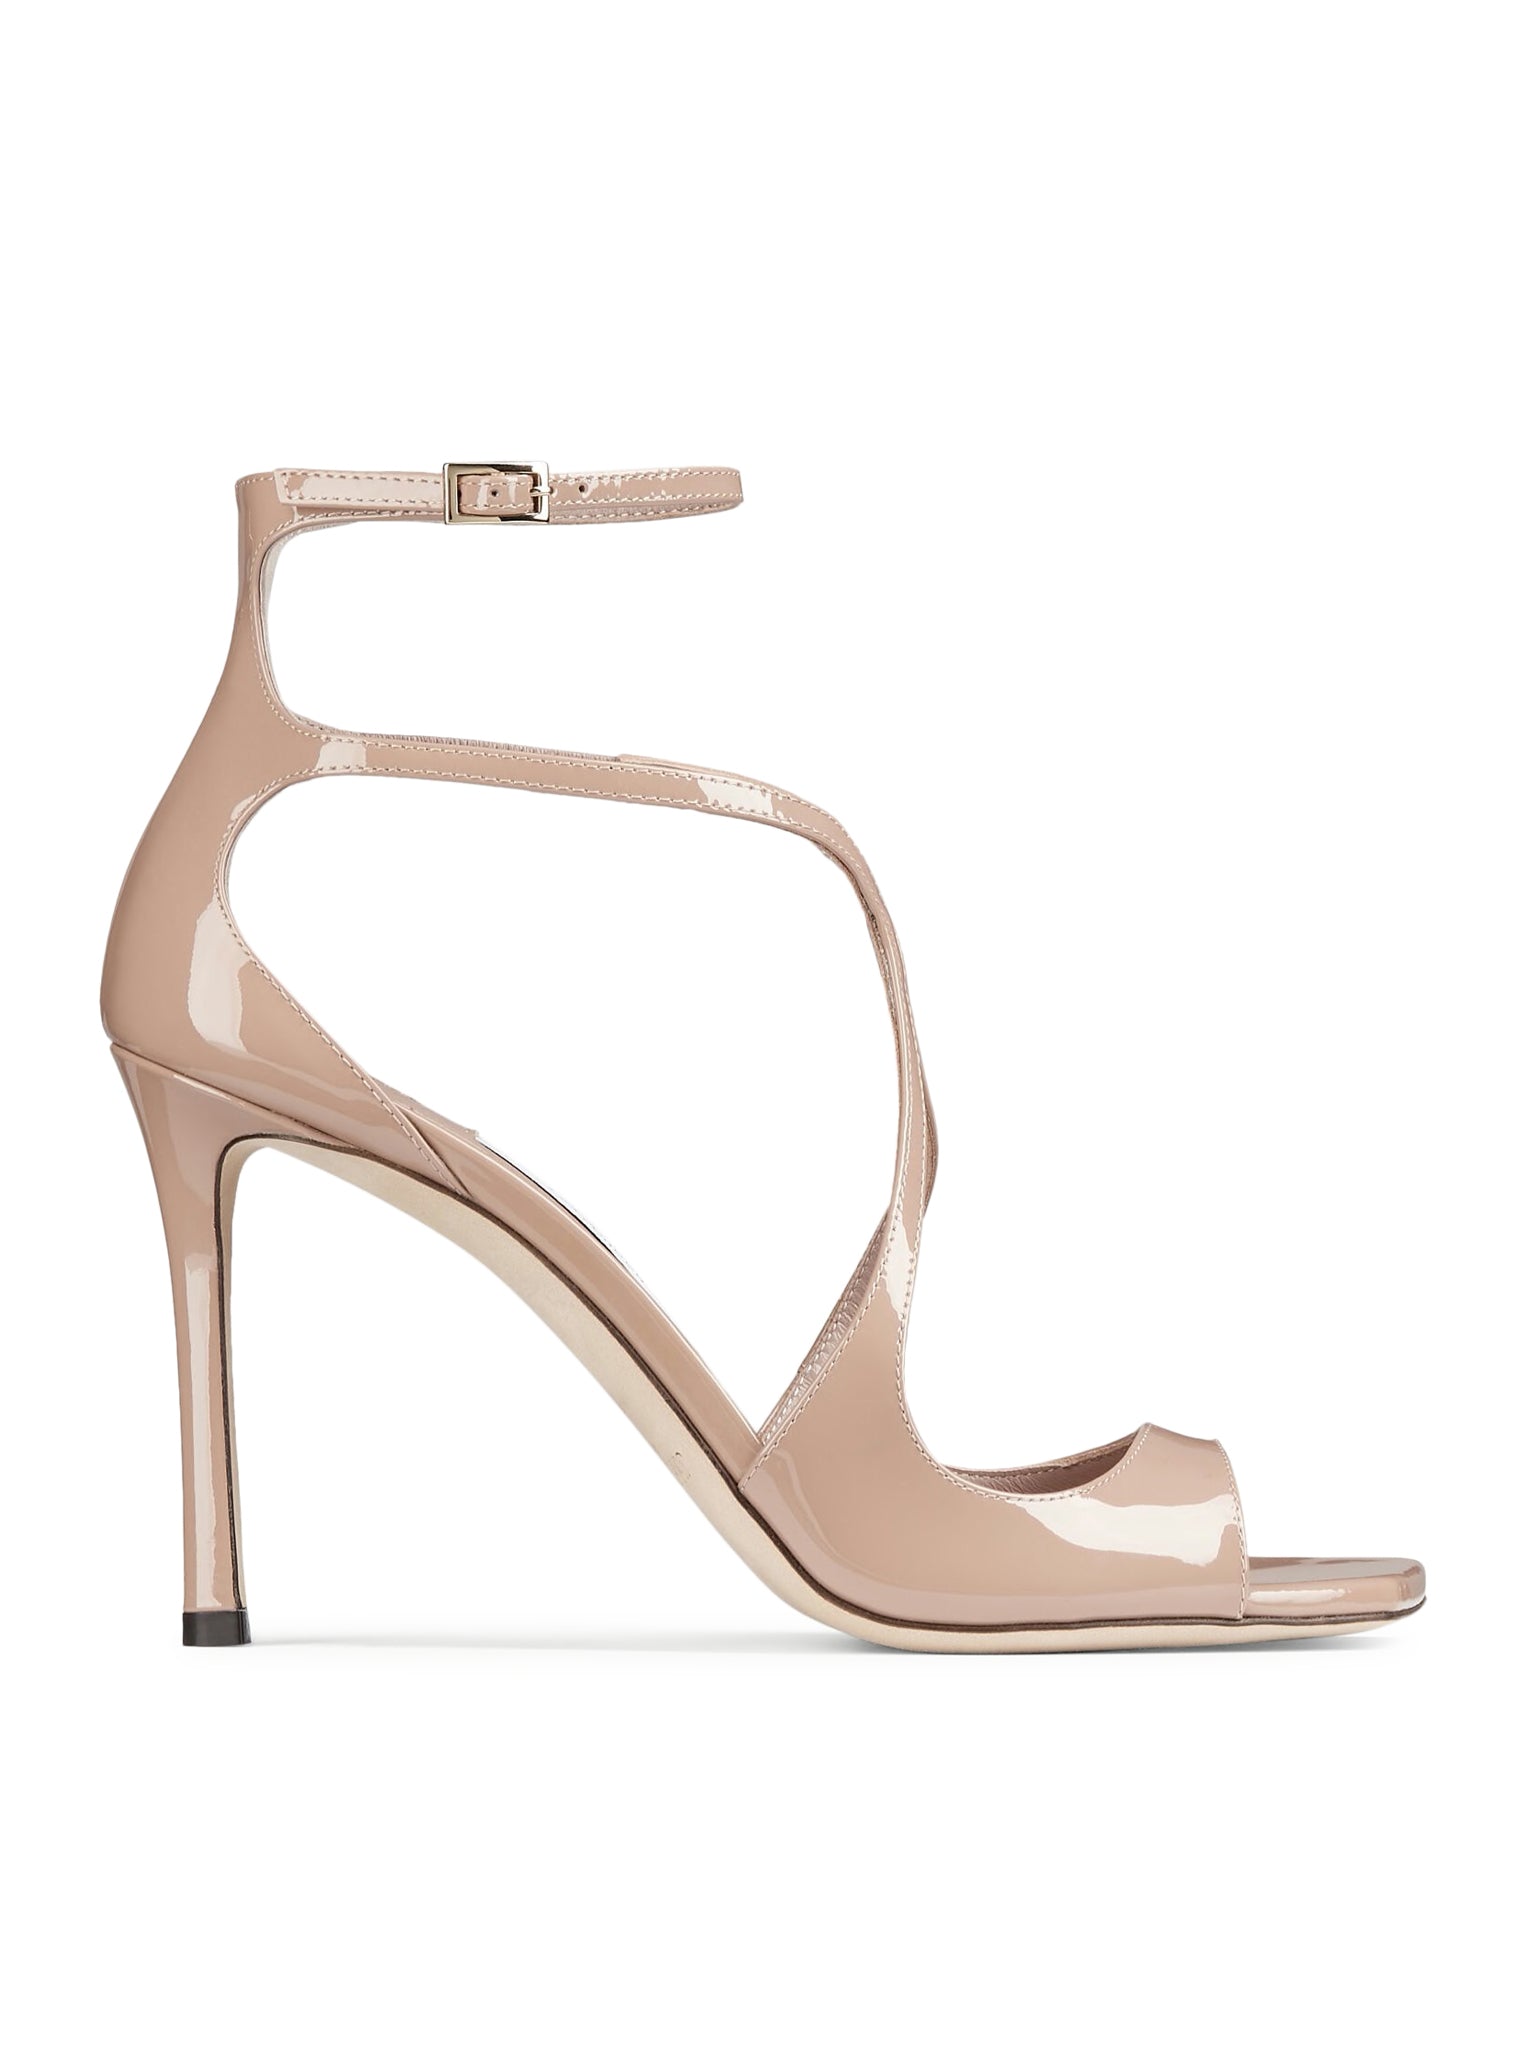 Pastel pink patent leather sandals